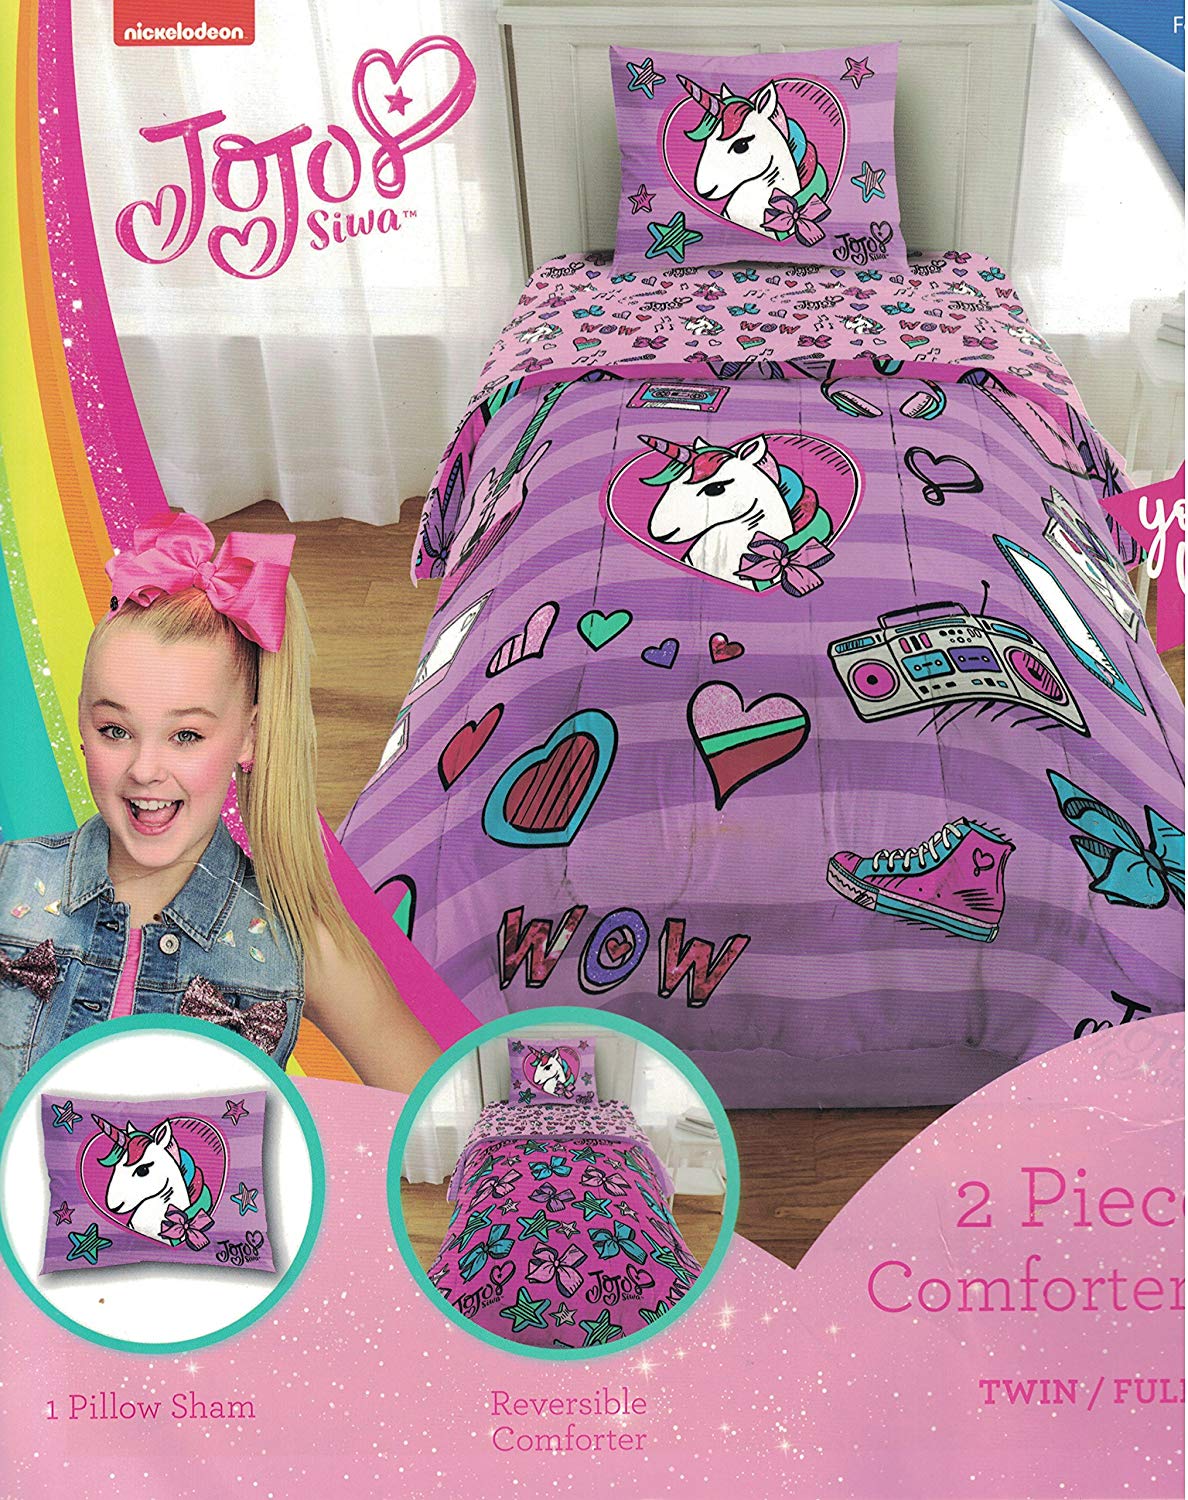 Jay Franco Nickelodeon JoJo Siwa Sprinkles /& Ice Cream Twin Sheet Set Fade Resistant Microfiber Sheets Official Nickelodeon Product 3 Piece Set Super Soft and Cozy Kid/’s Bedding